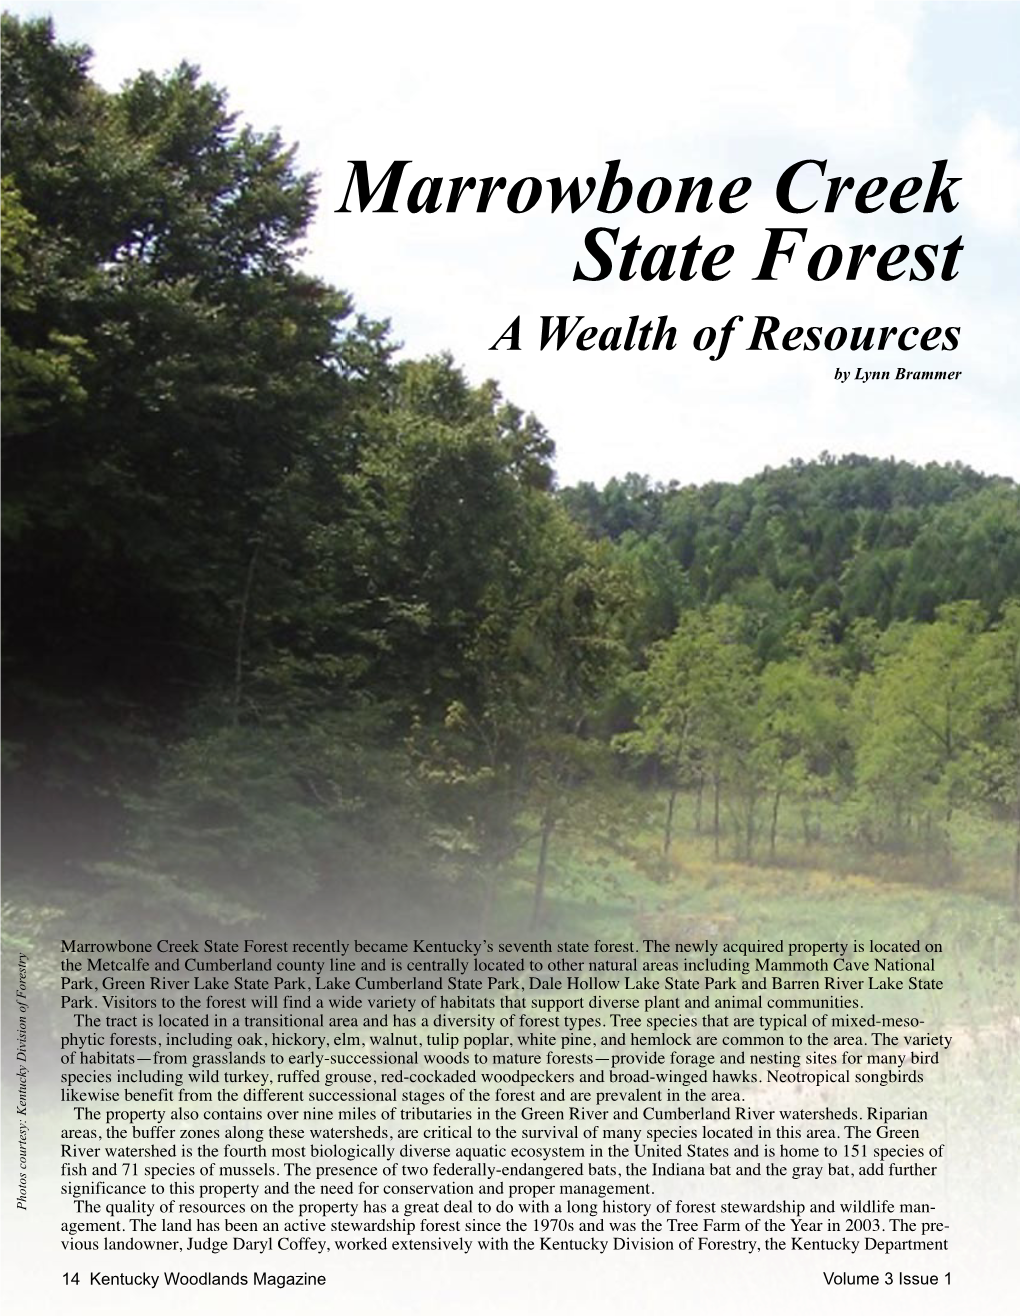 Marrowbone Creek State Forest a Wealth of Resources by Lynn Brammer